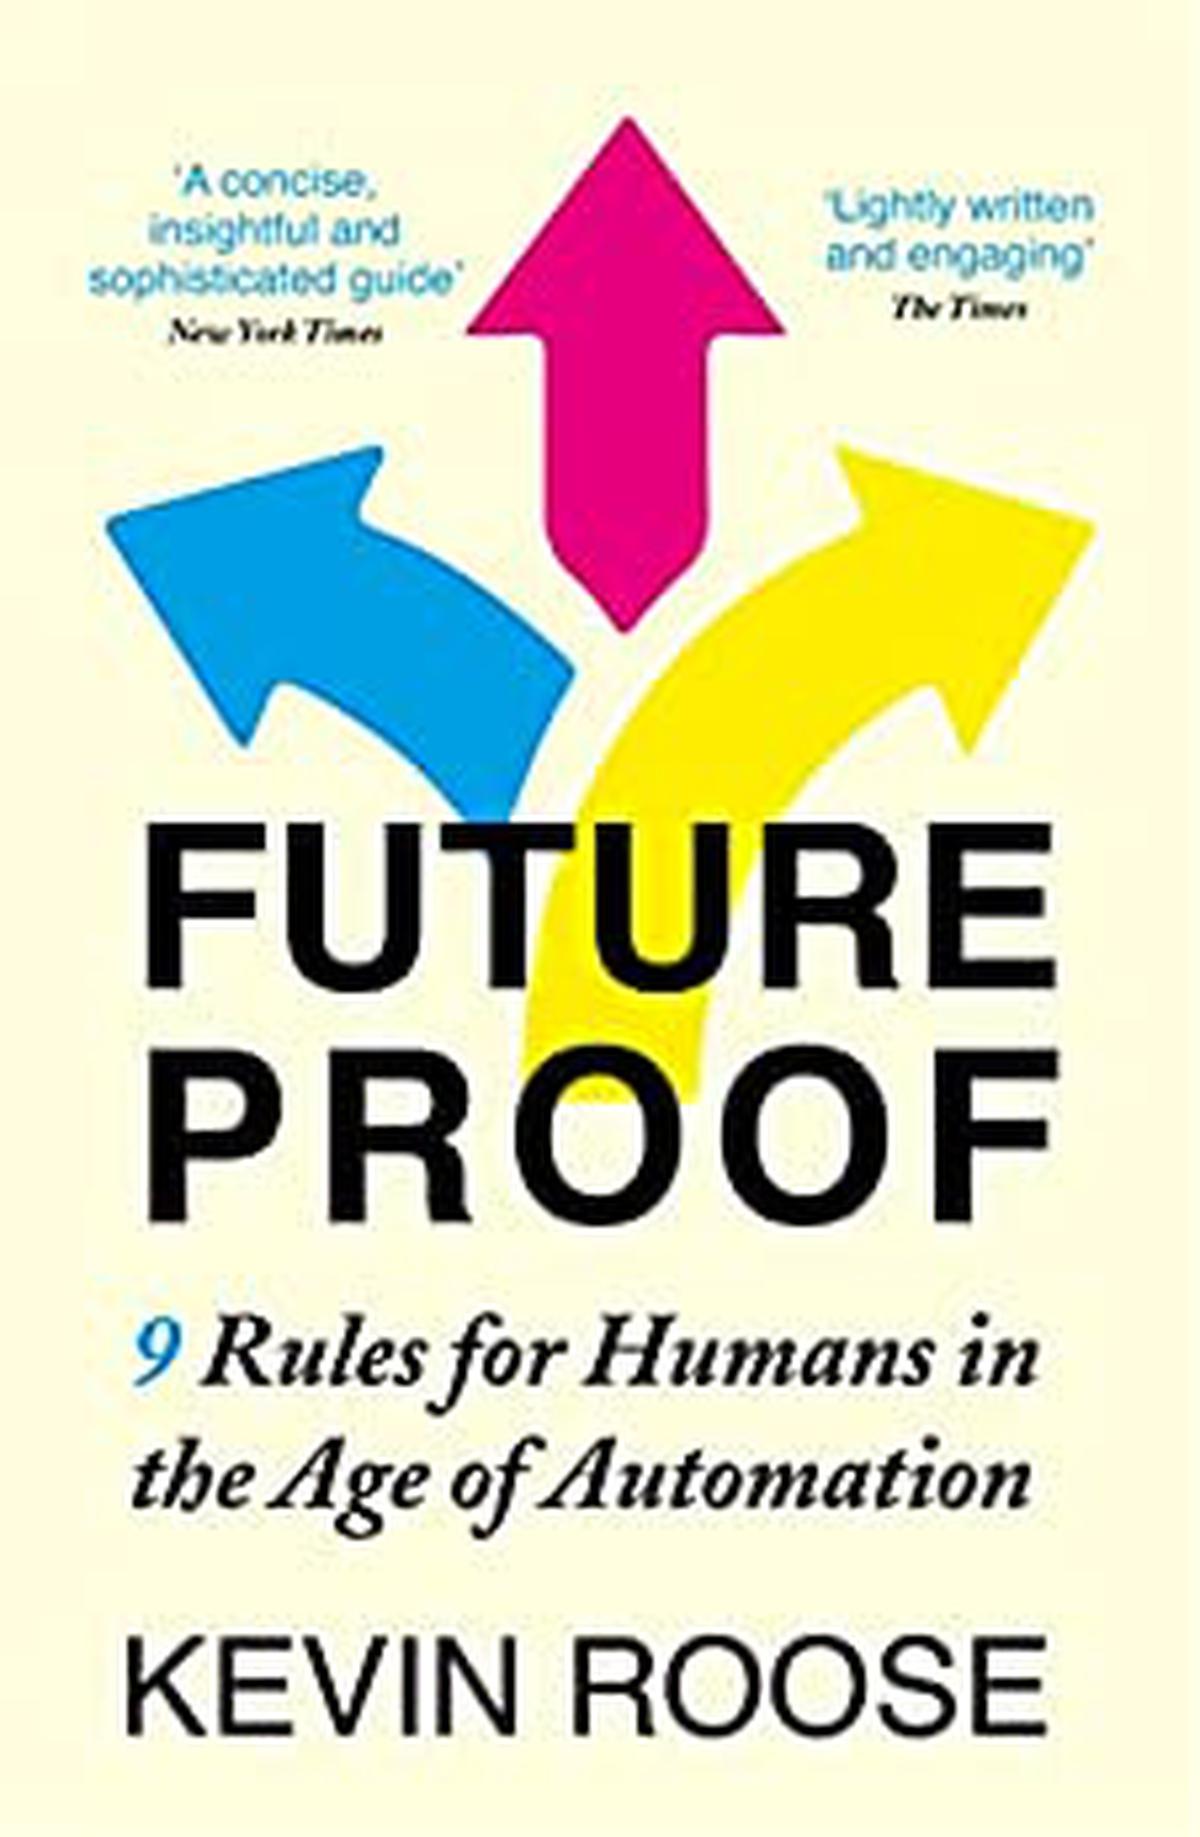 Health Books for May: Future Proof